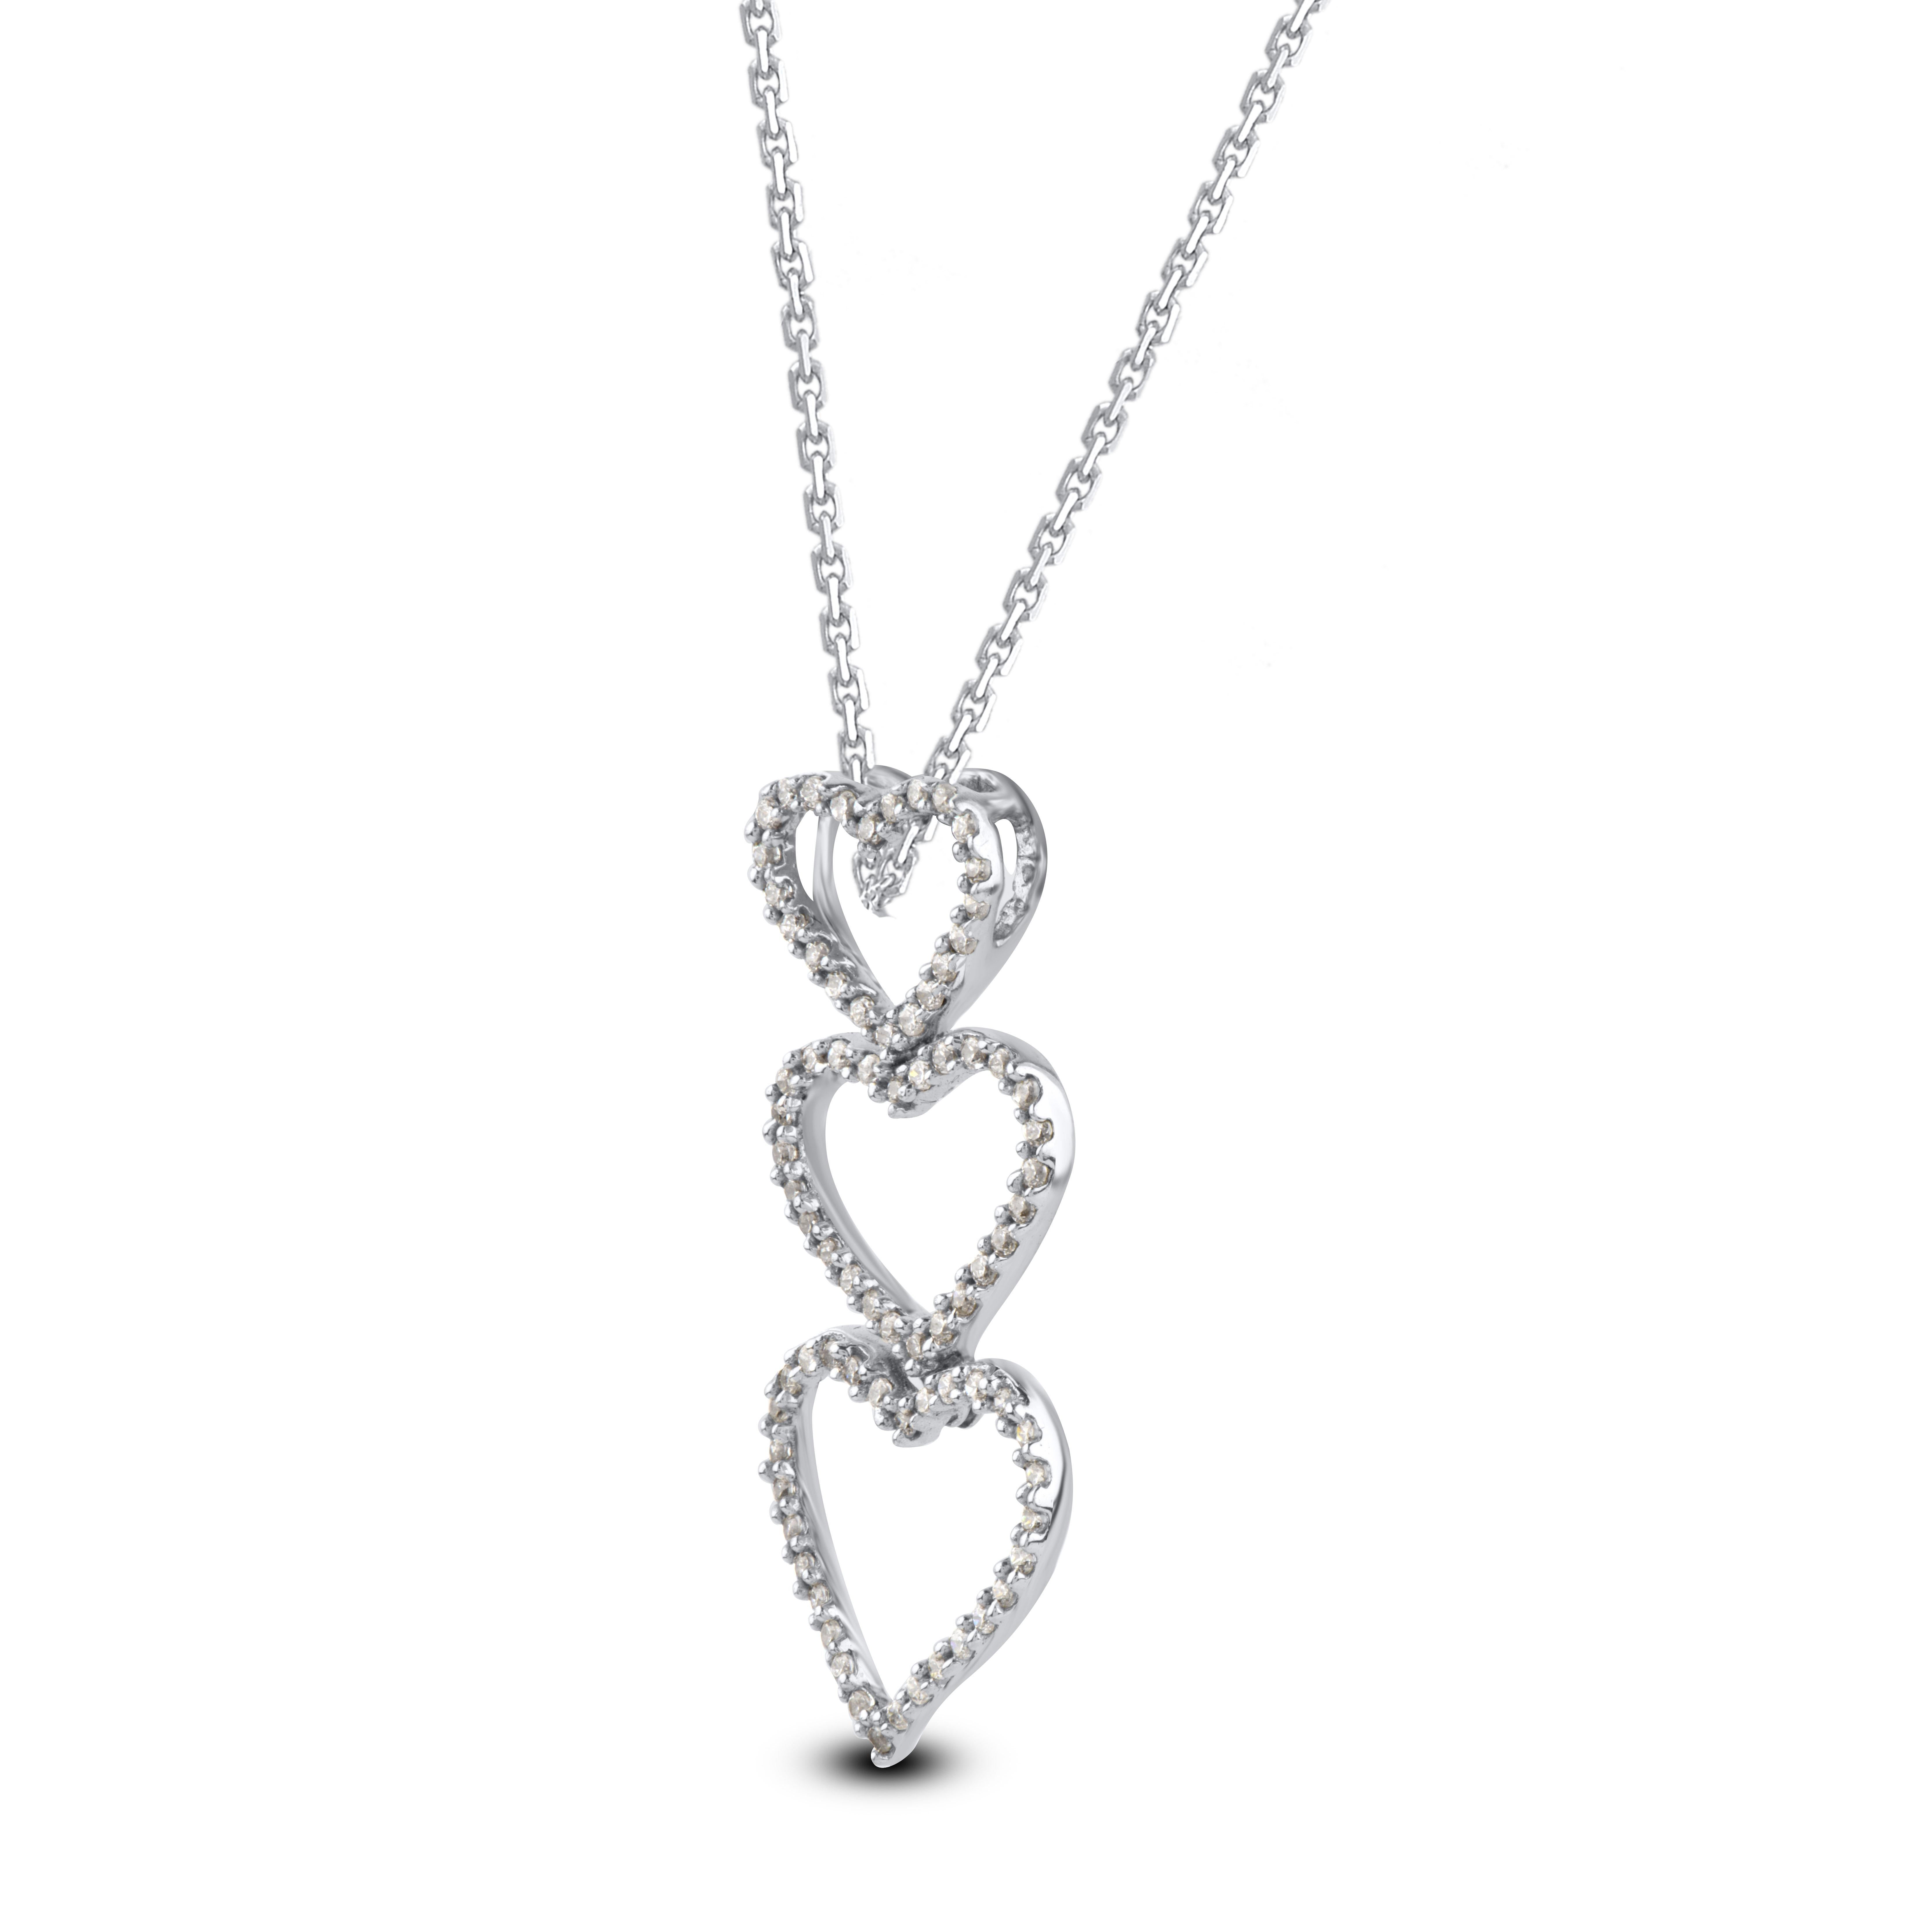 Bring charm to your look with this diamond heart pendant necklace. The pendant is crafted from 14 karat white gold and features 78 round single cut diamond set in pave setting and a high polish finish complete the brilliant sophistication of this